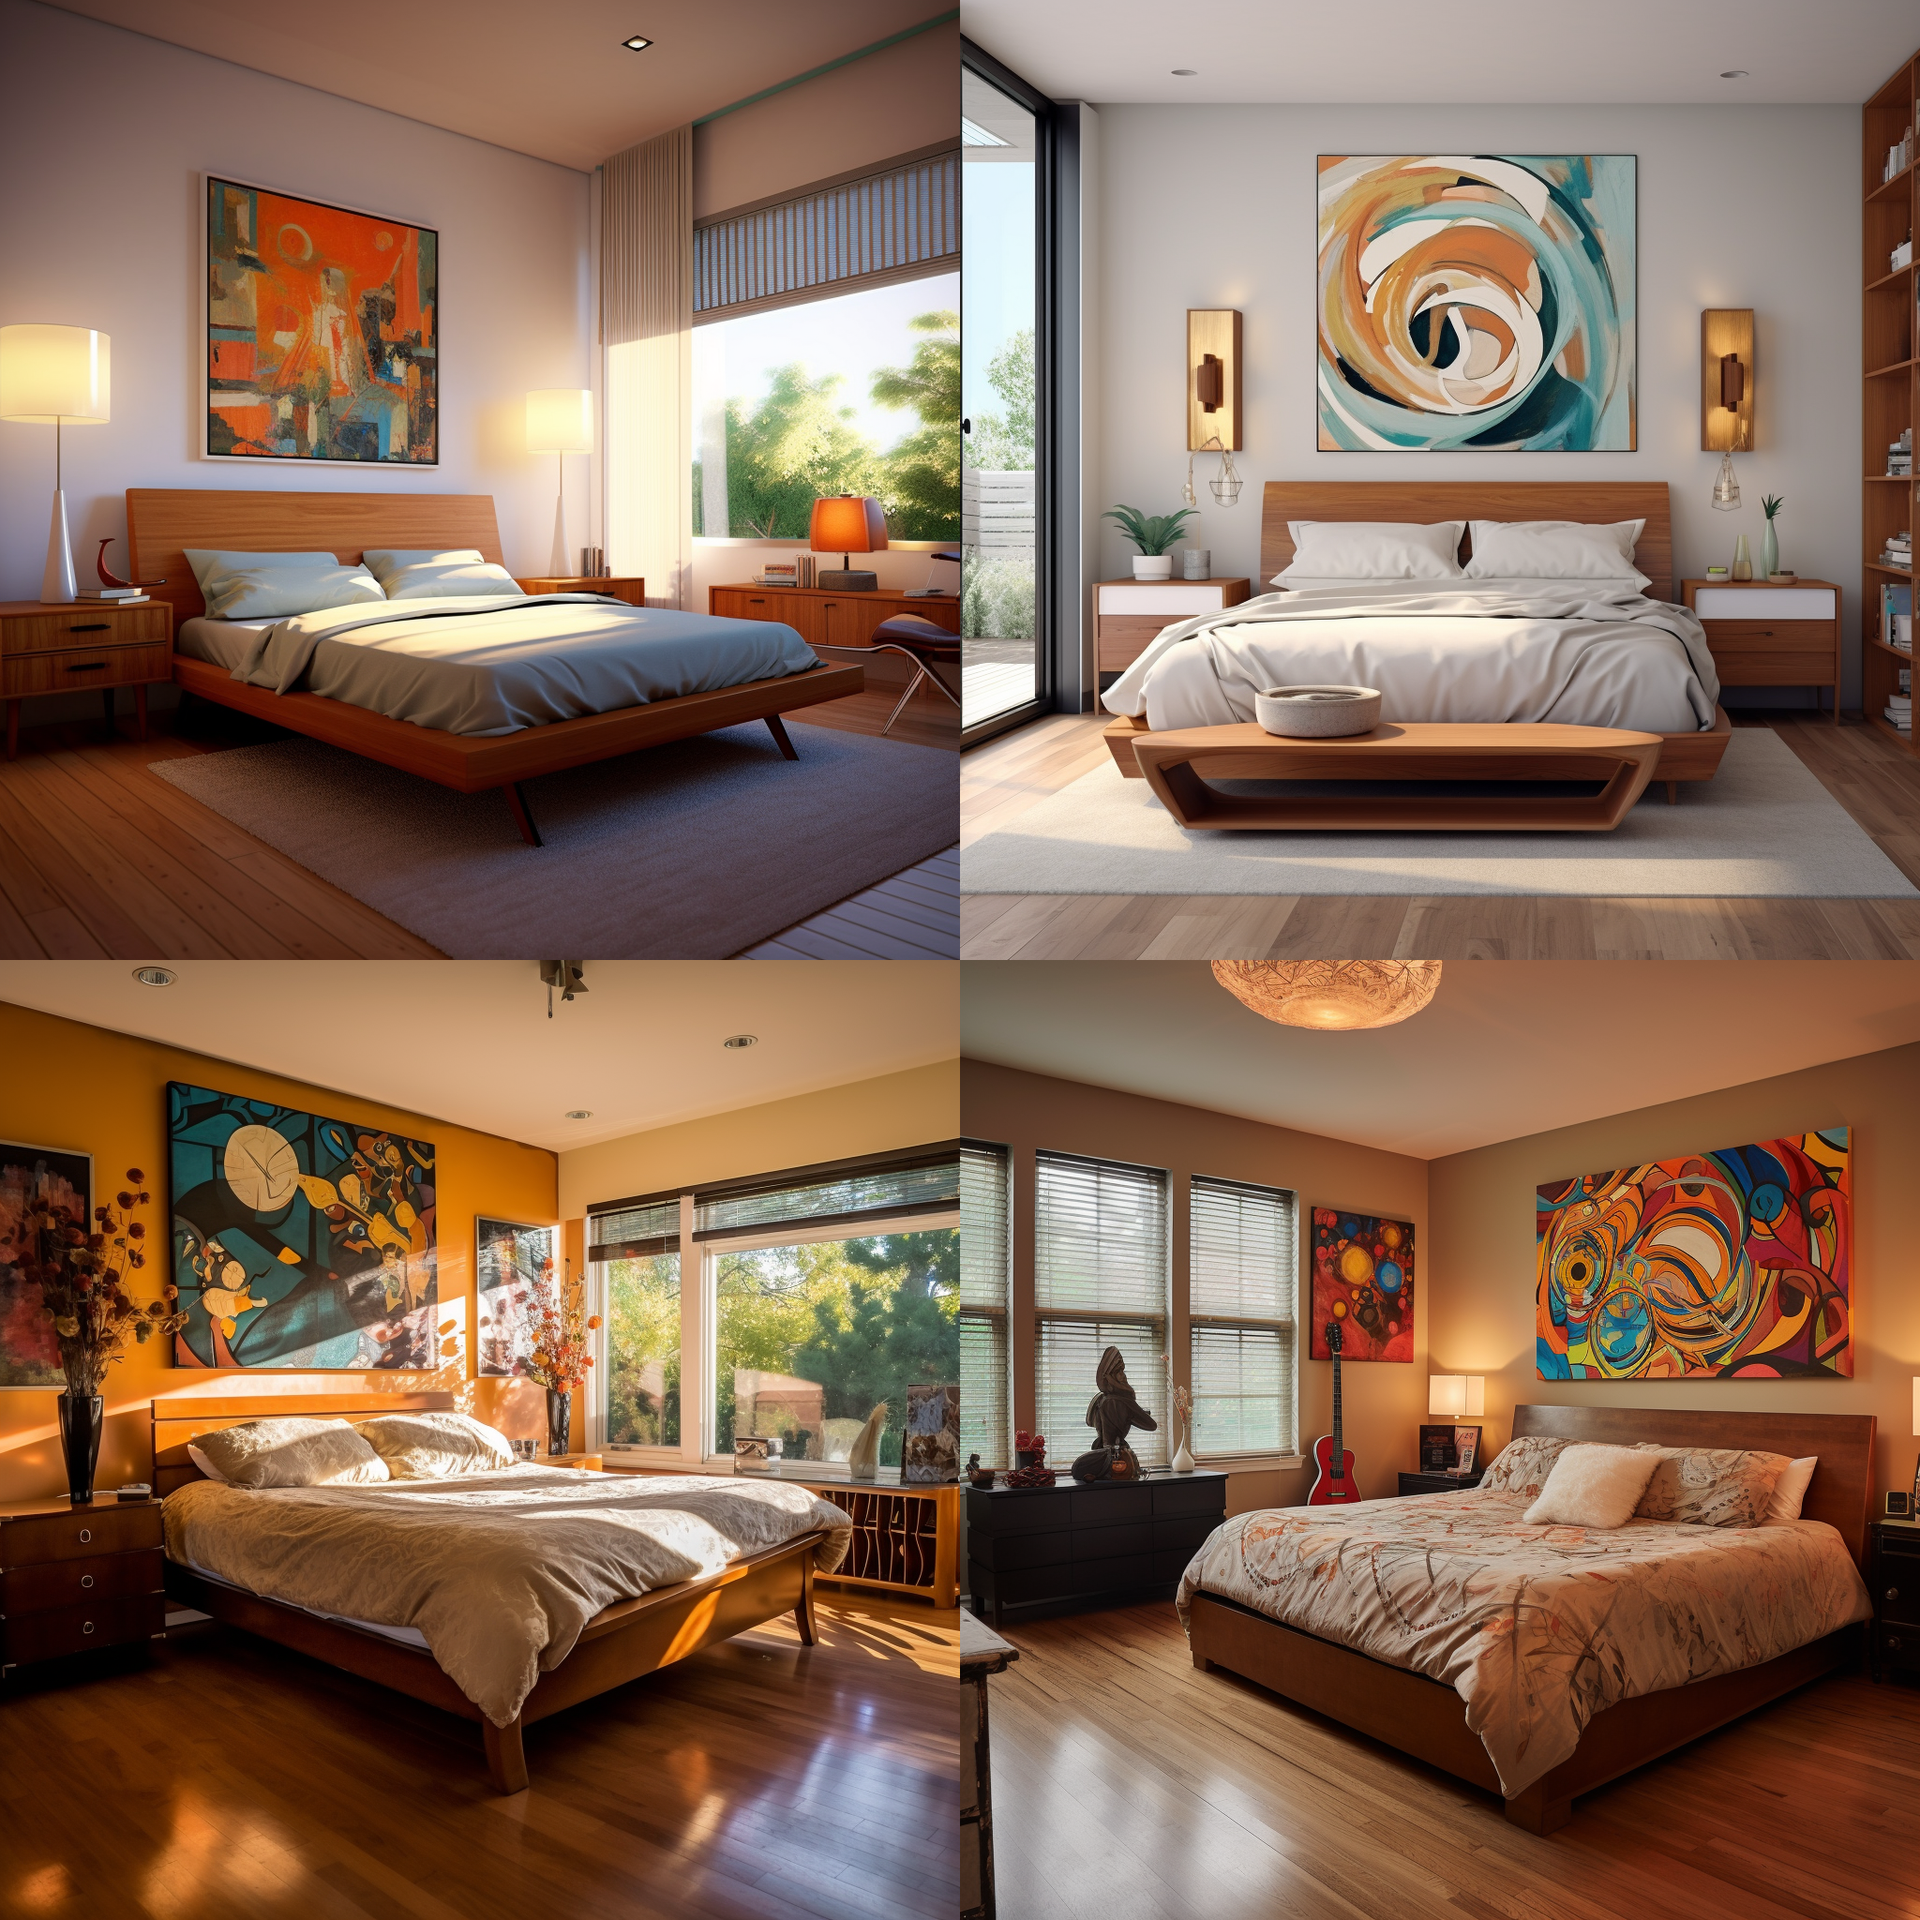 Four pictures of bedrooms with beds and paintings on the walls